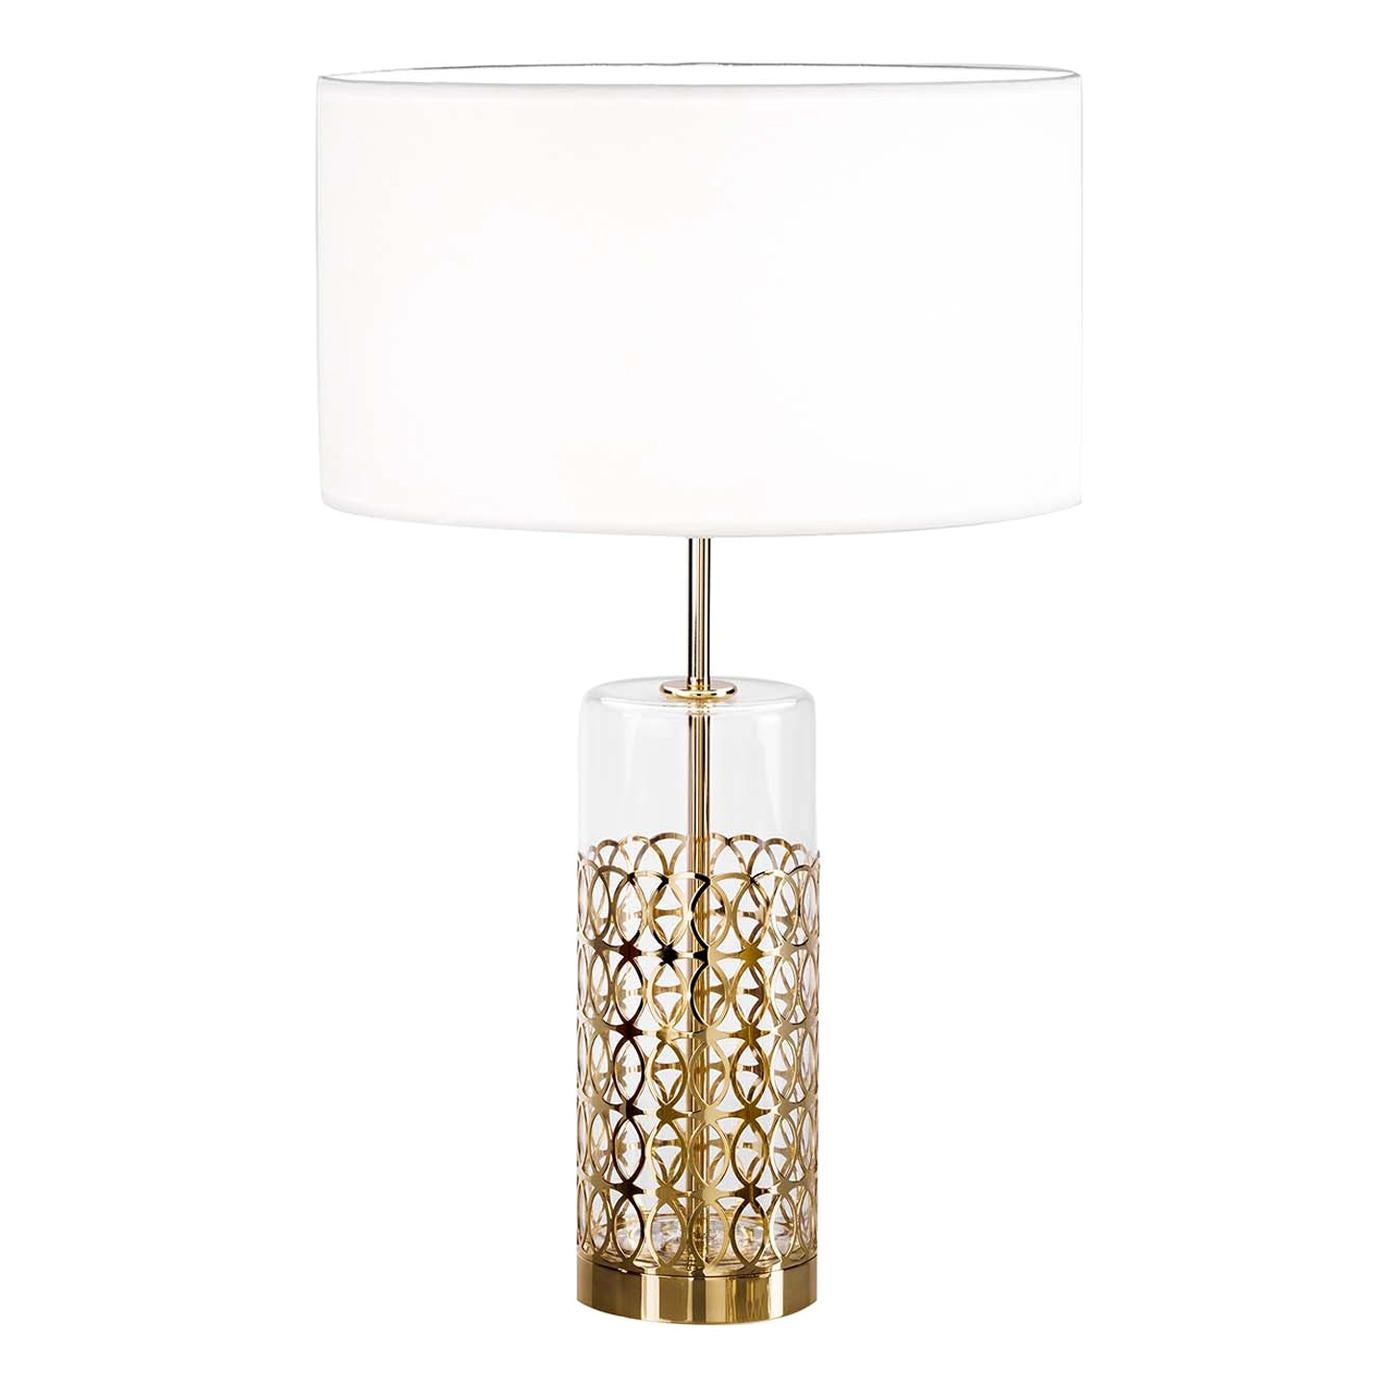 New York Golden Table Lamp For Sale at 1stDibs